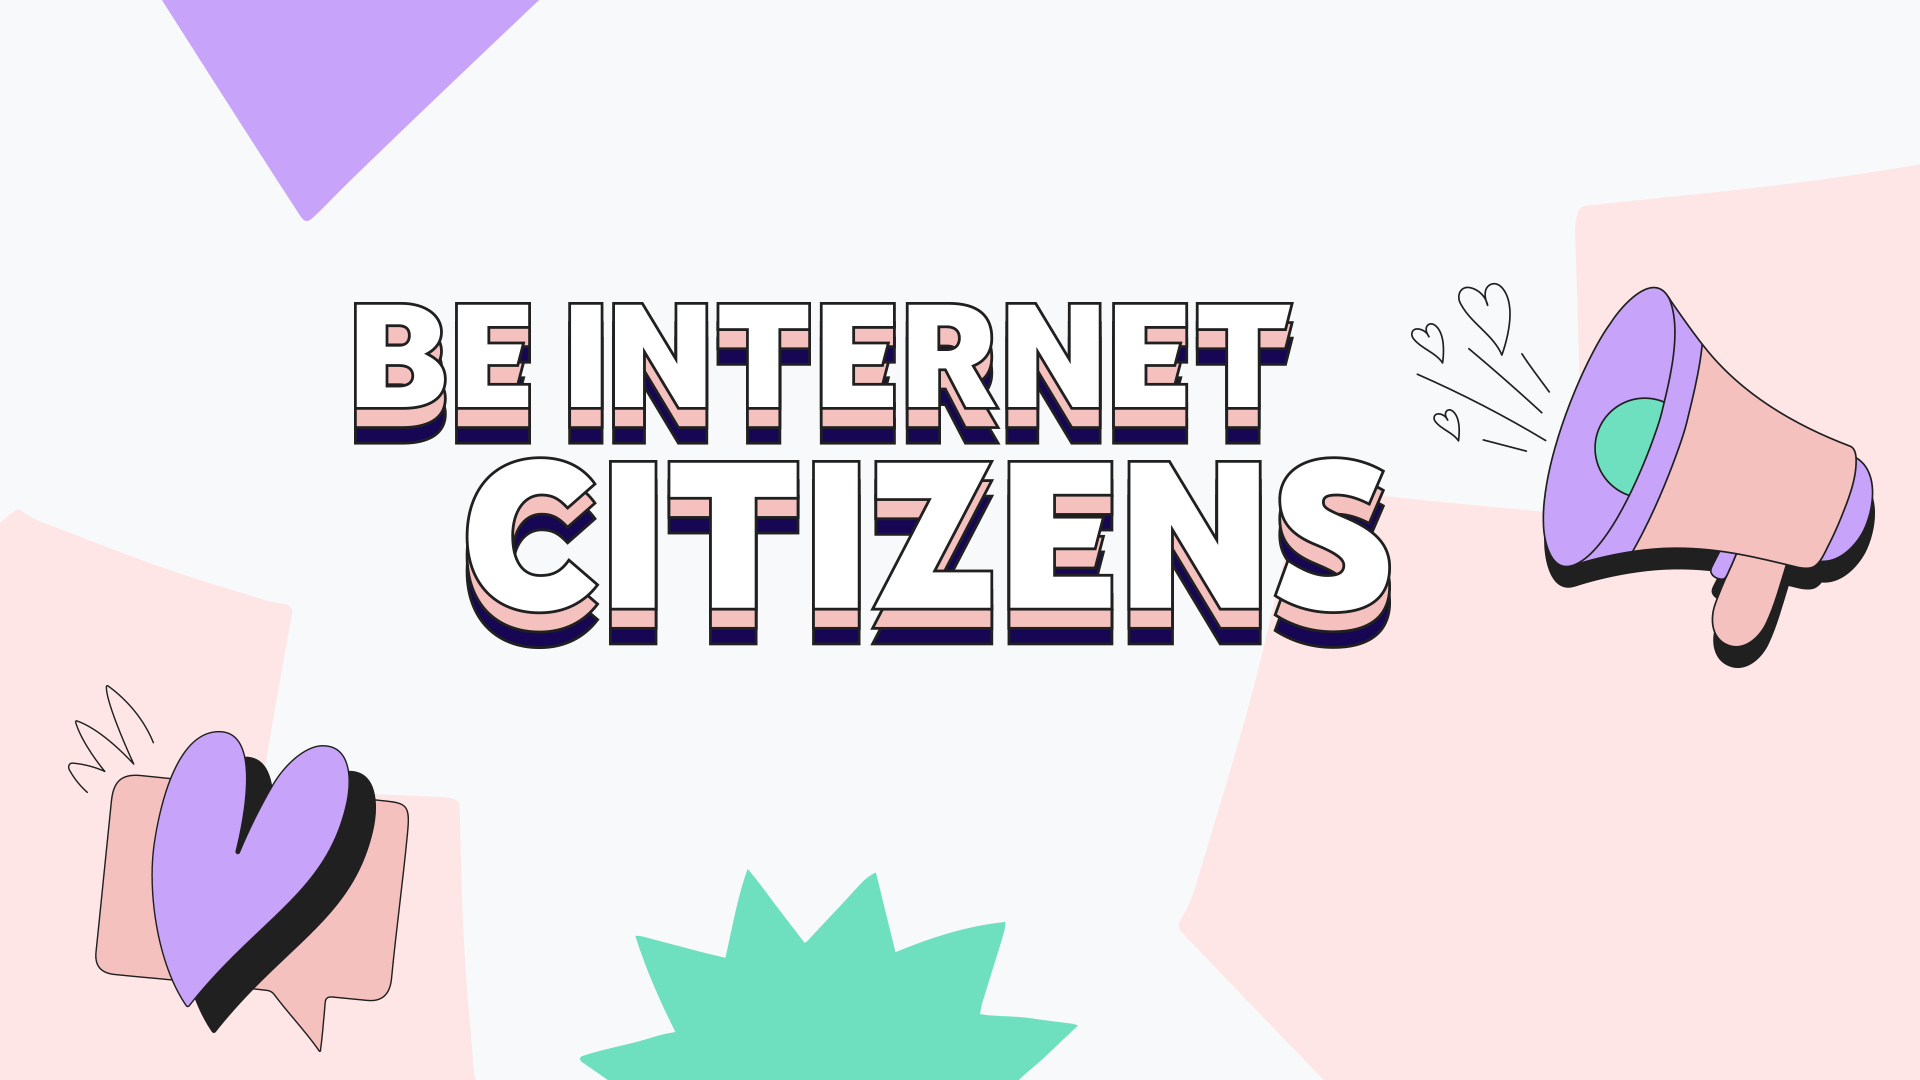 Be Internet Citizens goes big